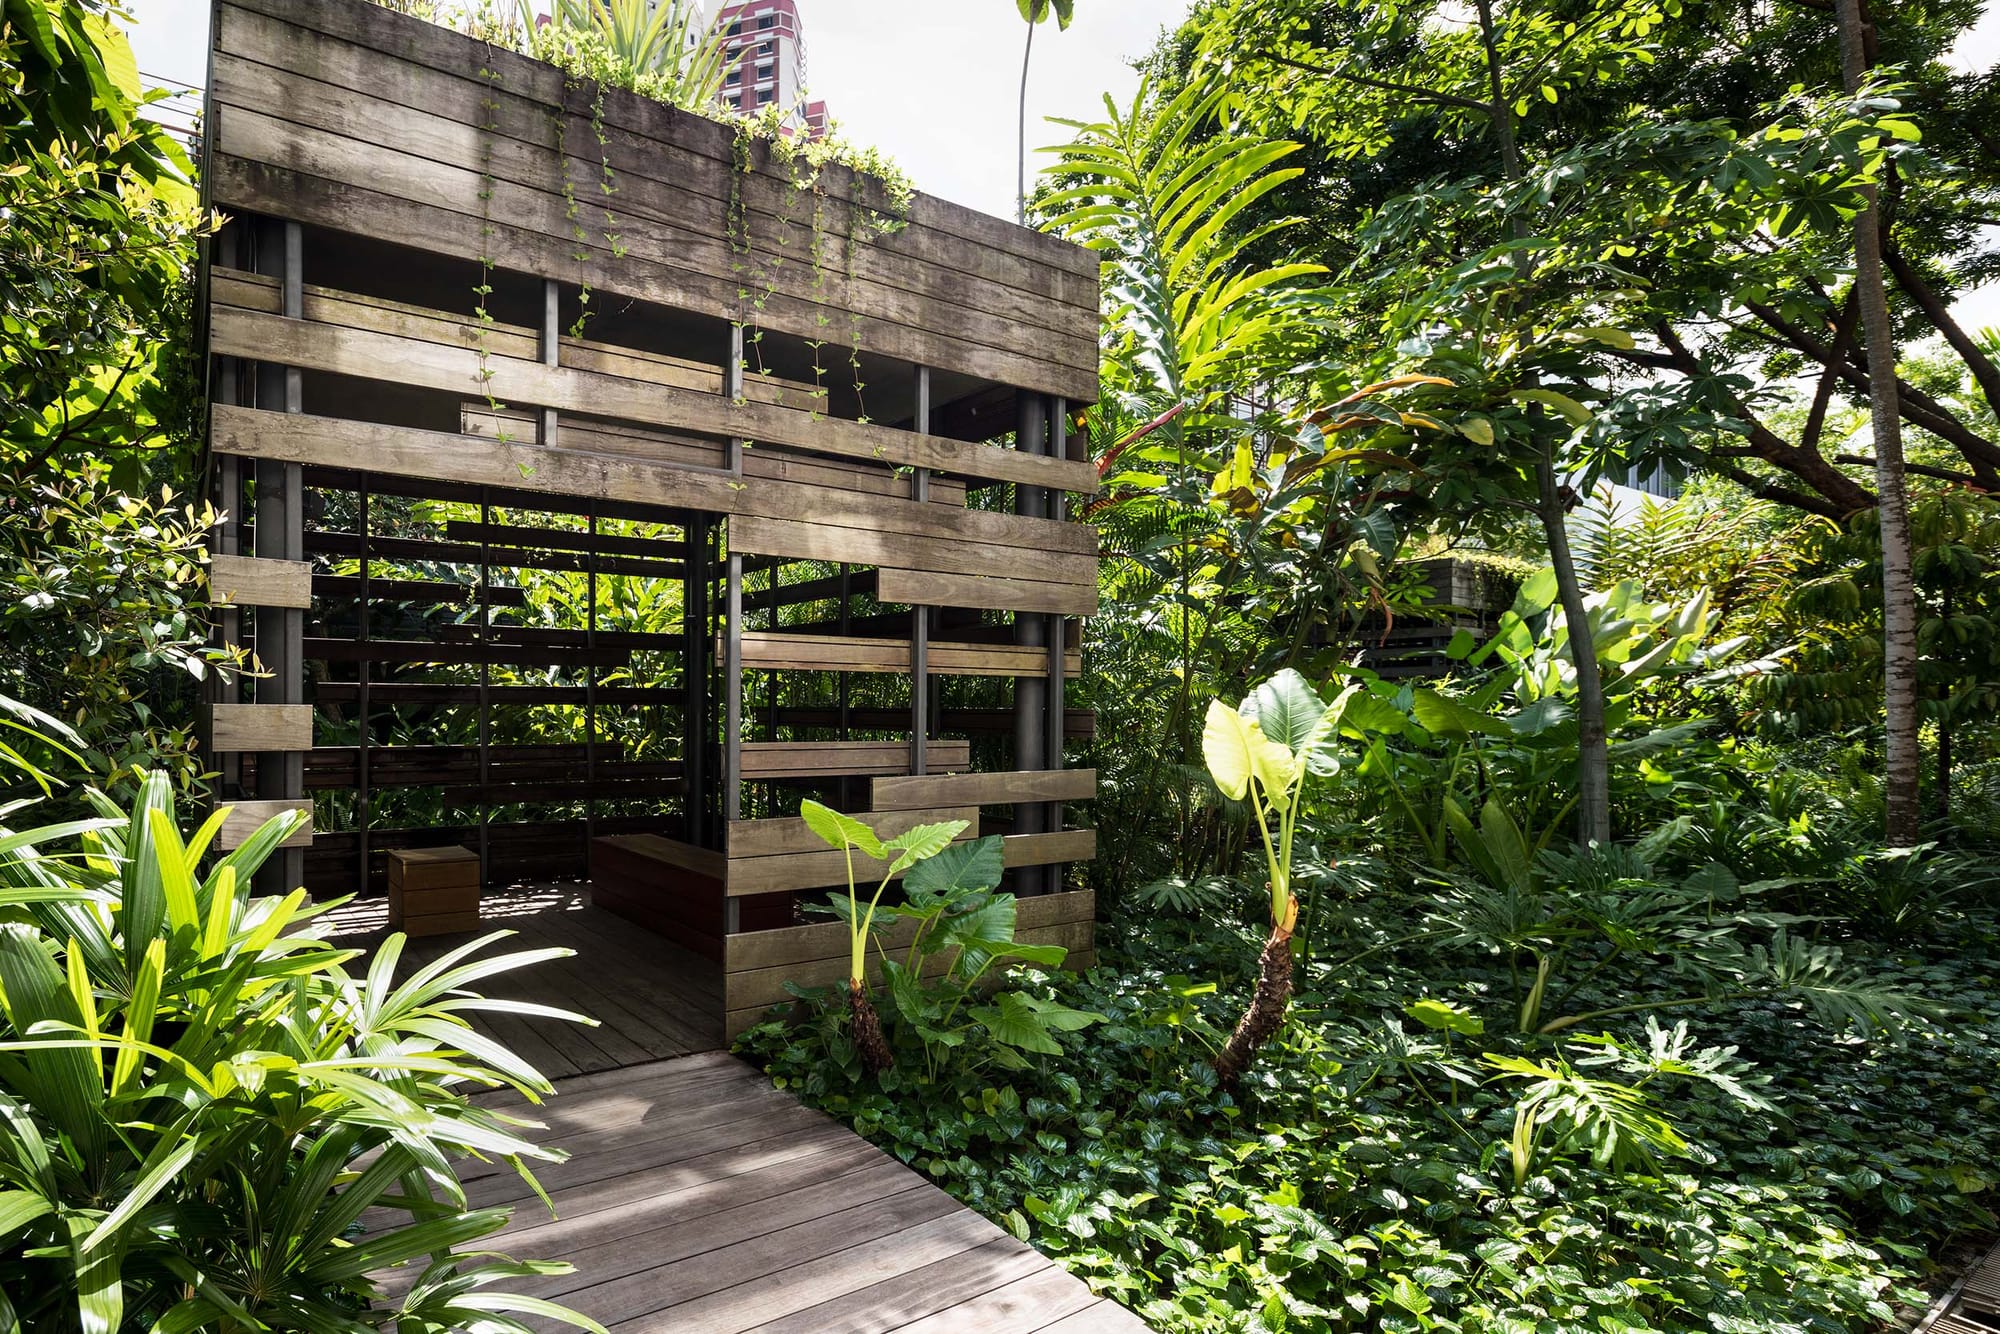 A wooden structure with walkway within a lush green landscape